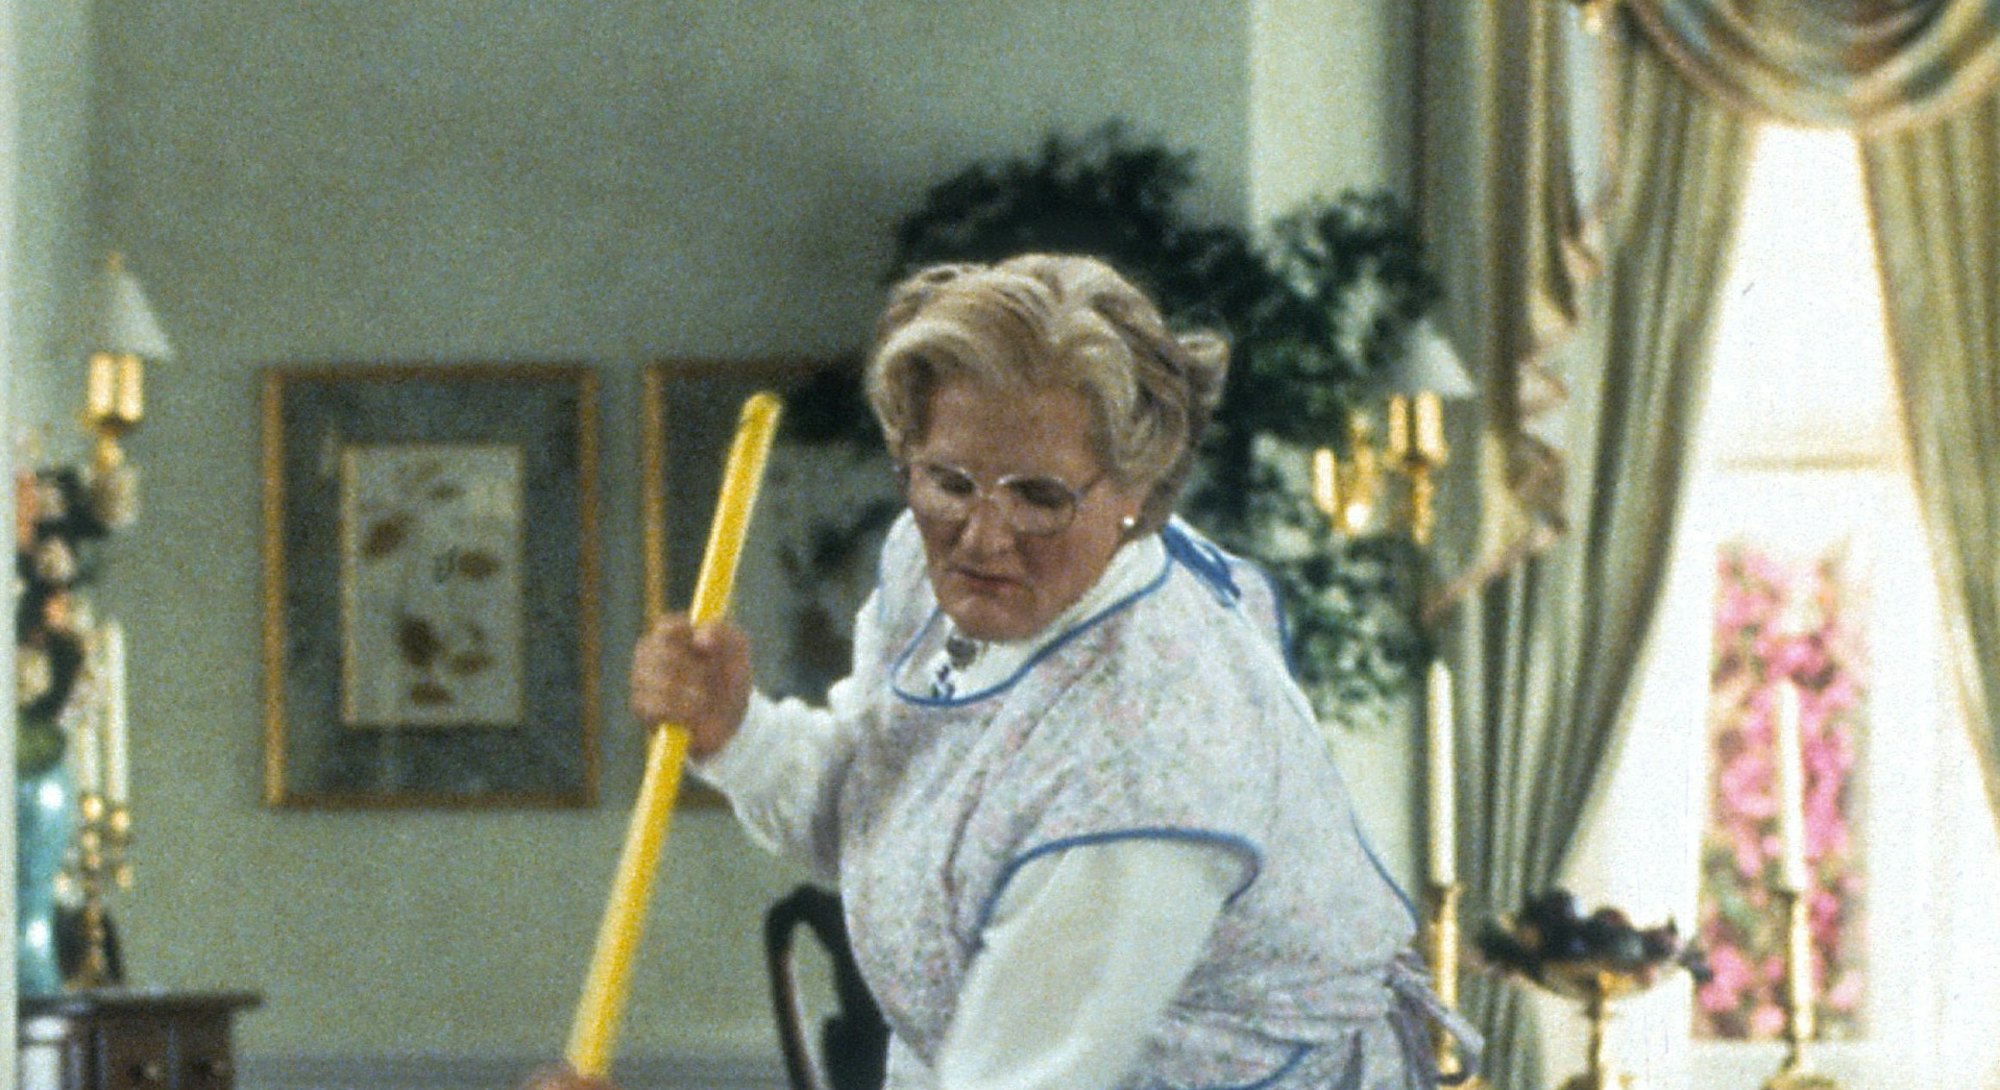 Mrs. Doubtfire will be available to stream on Disney+ in August 2021.